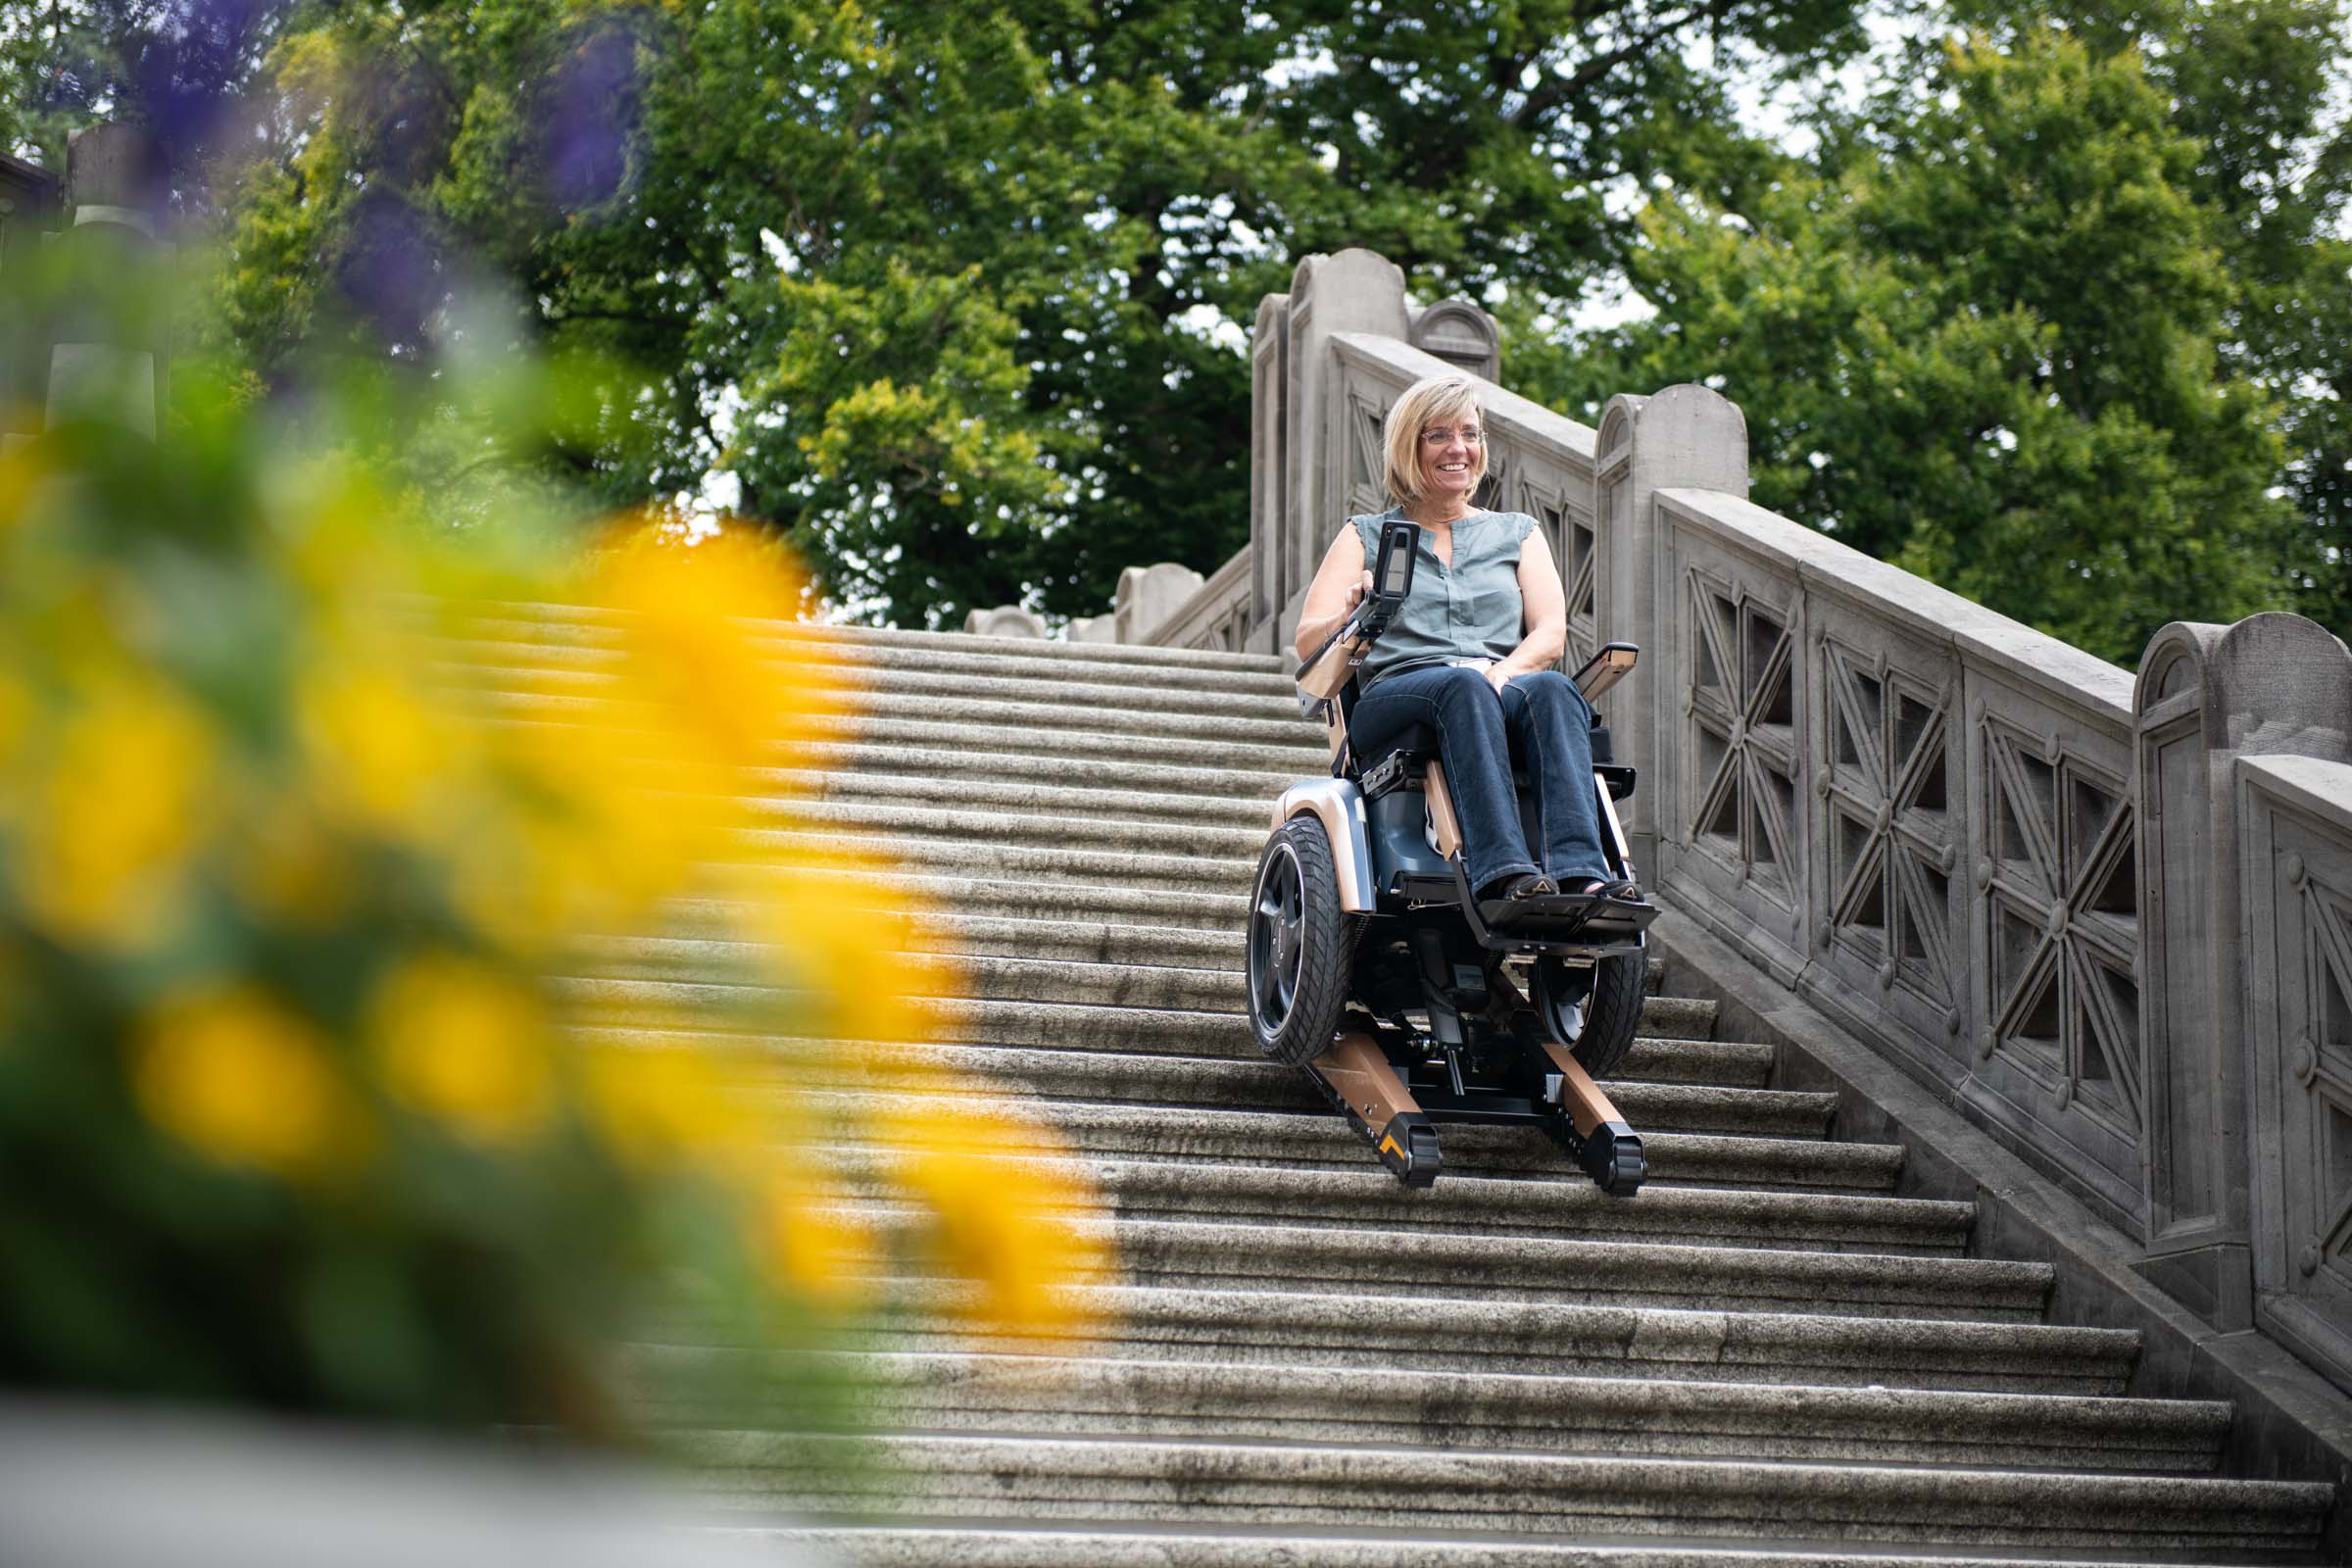 Scewo wheelchair in action. Image credit: Scewo